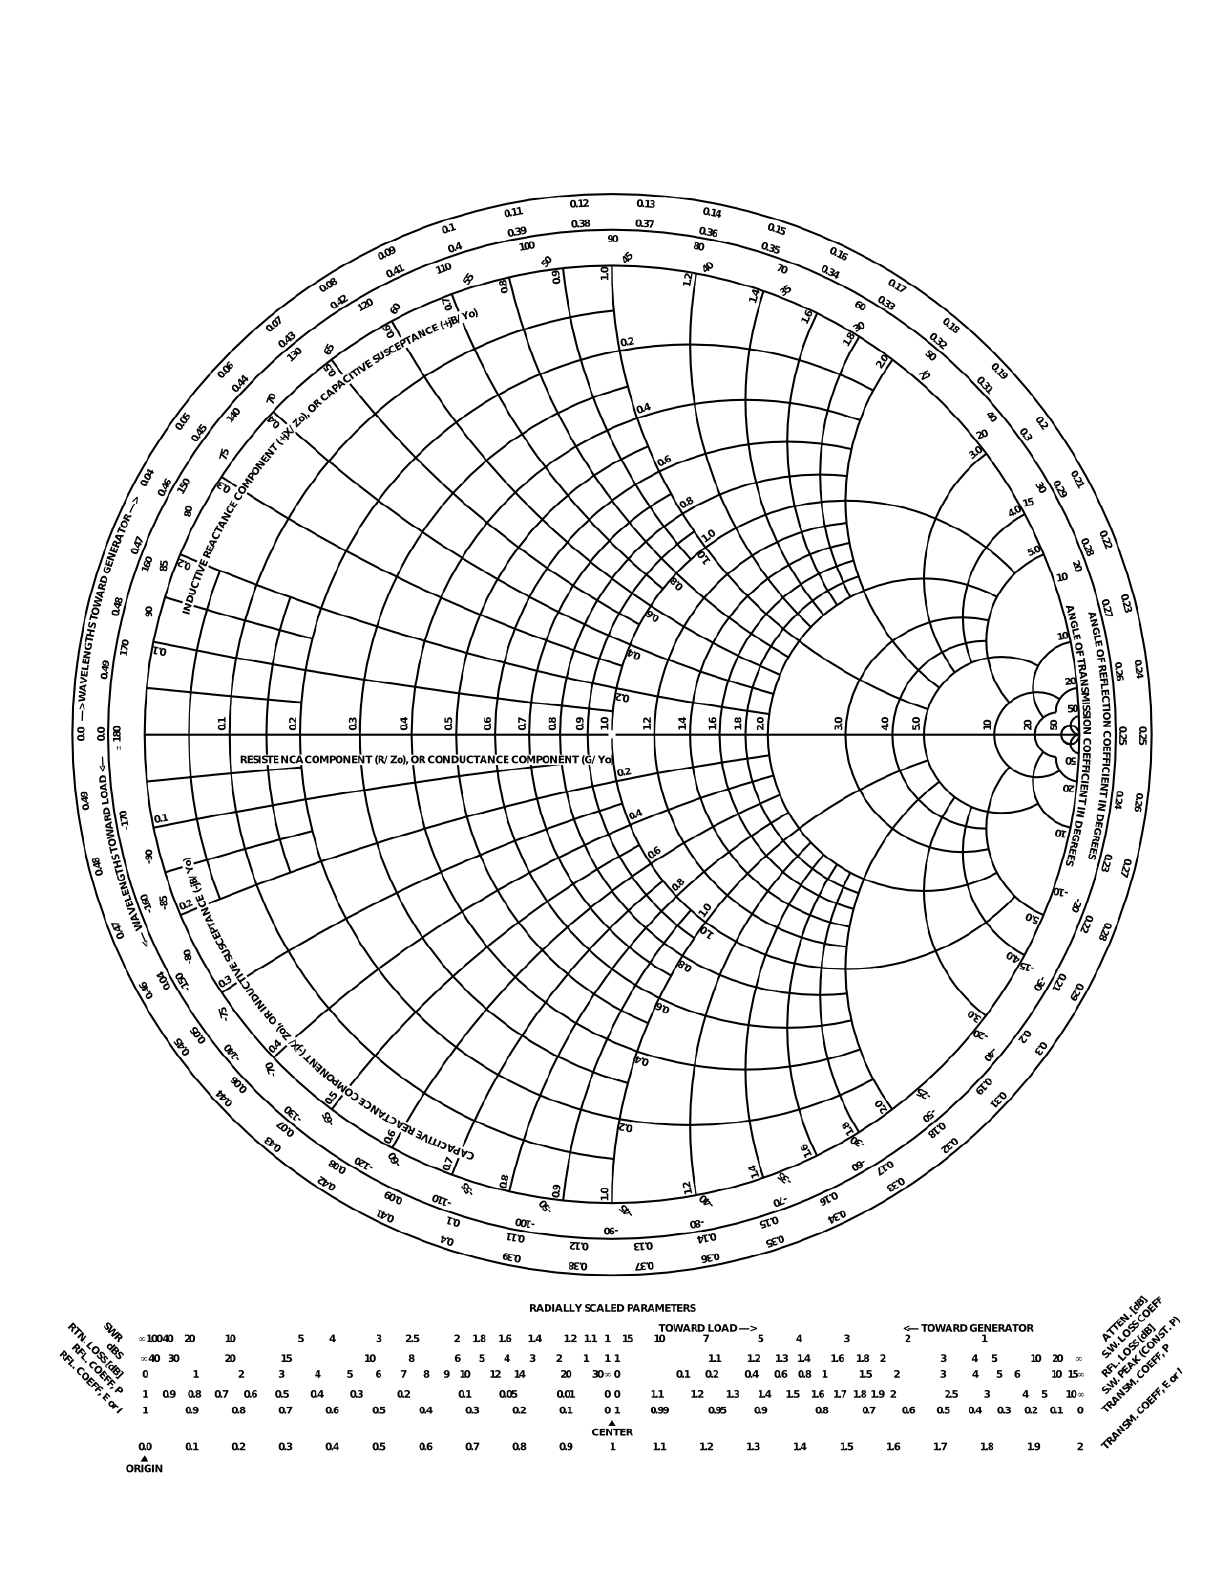 using a smith chart